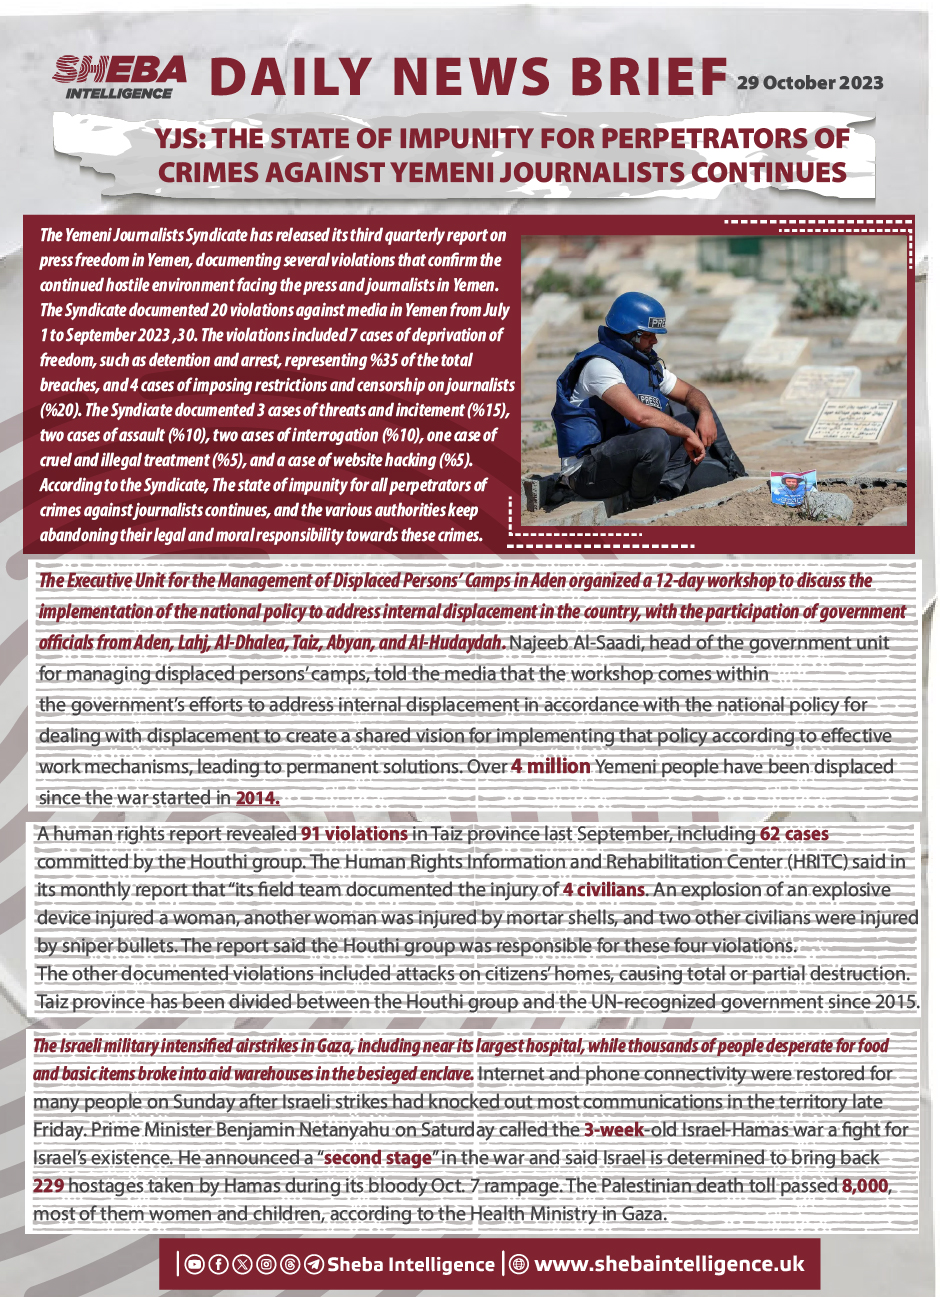 YJS: The State of Impunity for Perpetrators of Crimes Against Yemeni Journalists Continues